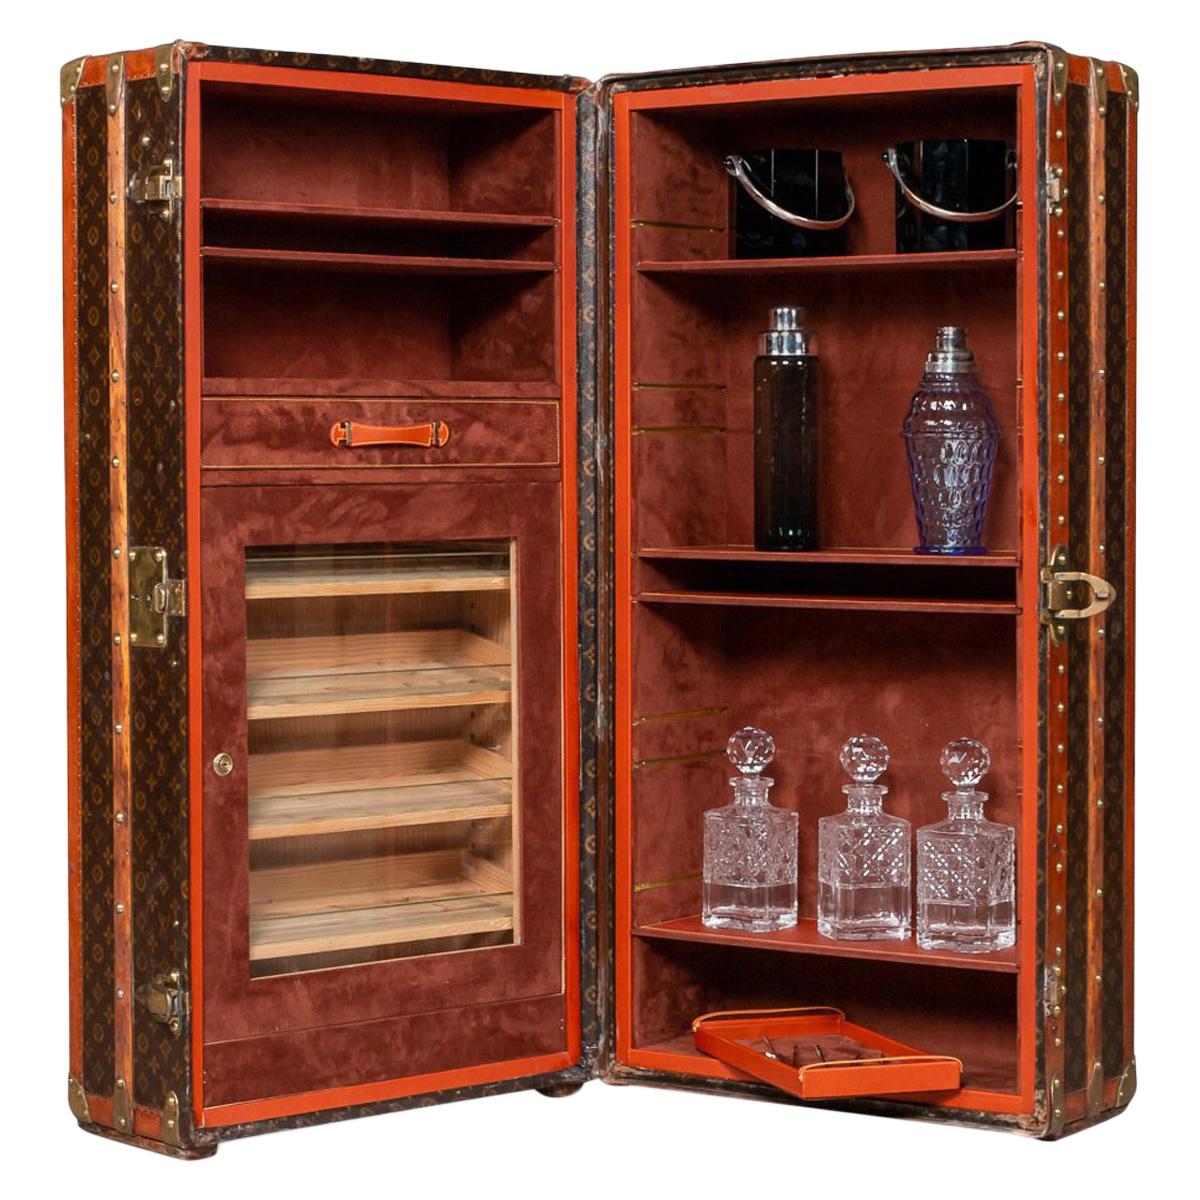 LOUIS VUITTON. A VERY FINE WARDROBE TRUNK WITH HUMIDOR AND DISPLAY SHELVES,  CUSTOMIZED BY BERNARDINI LUXURY VINTAGE